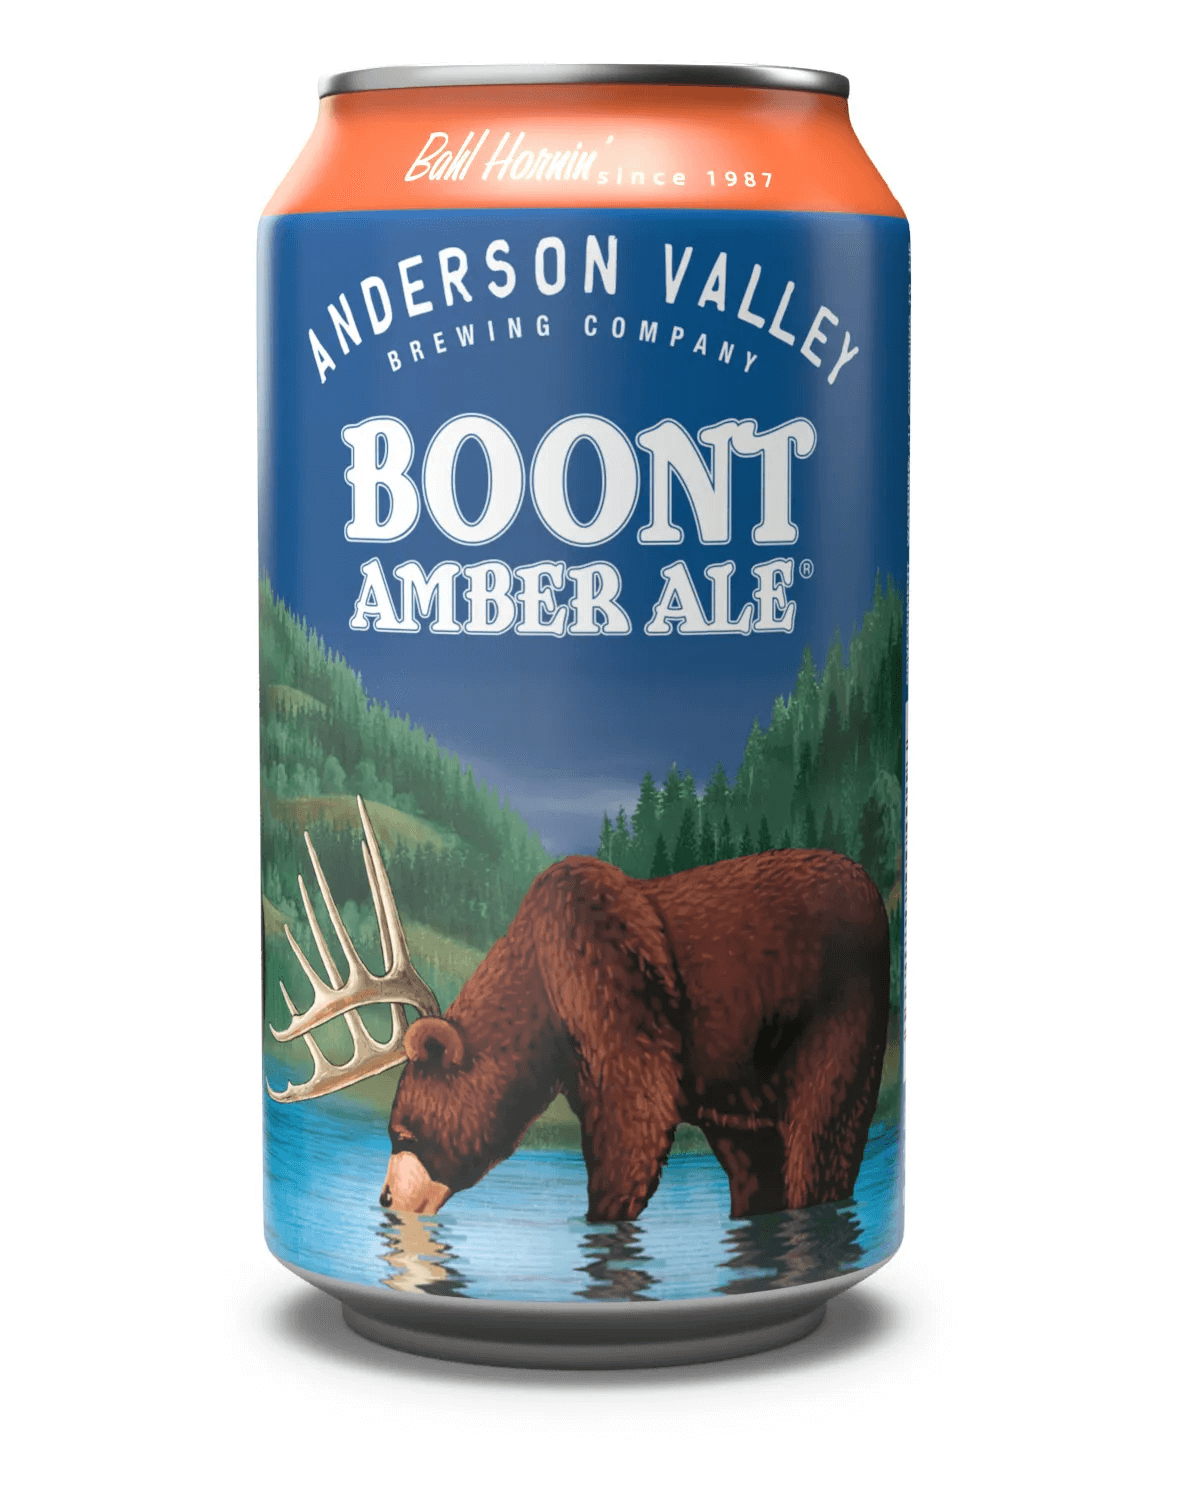 Anderson Valley Brewing Co's {"id":60,"brewery_id":9,"name":"Boont","image":"boont.png","slug":"anderson-valley-brewing-co\/boont","calories":null,"abv":"5.8","ibu":16,"type":"Ale","style":"Amber","description":"Balance is what makes our Boont Amber Ale so unique: rich, crystal malts give this beer a deep copper hue and contribute a slight caramel sweetness while the herbal, spicy bitterness from carefully selected whole-cone hops impart a crisp, clean finish. Hints of sun toasted grain, toffee, and fruity esters compliment the mellow, noble hop aroma.","available":"All Year","created_at":null,"updated_at":null,"brewery":{"id":9,"user_id":null,"name":"Anderson Valley Brewing Co","slug":null,"logo":null,"description":null,"website":null,"address":null,"facebook_url":null,"twitter_url":null,"instagram_url":null,"created_at":null,"updated_at":null}}